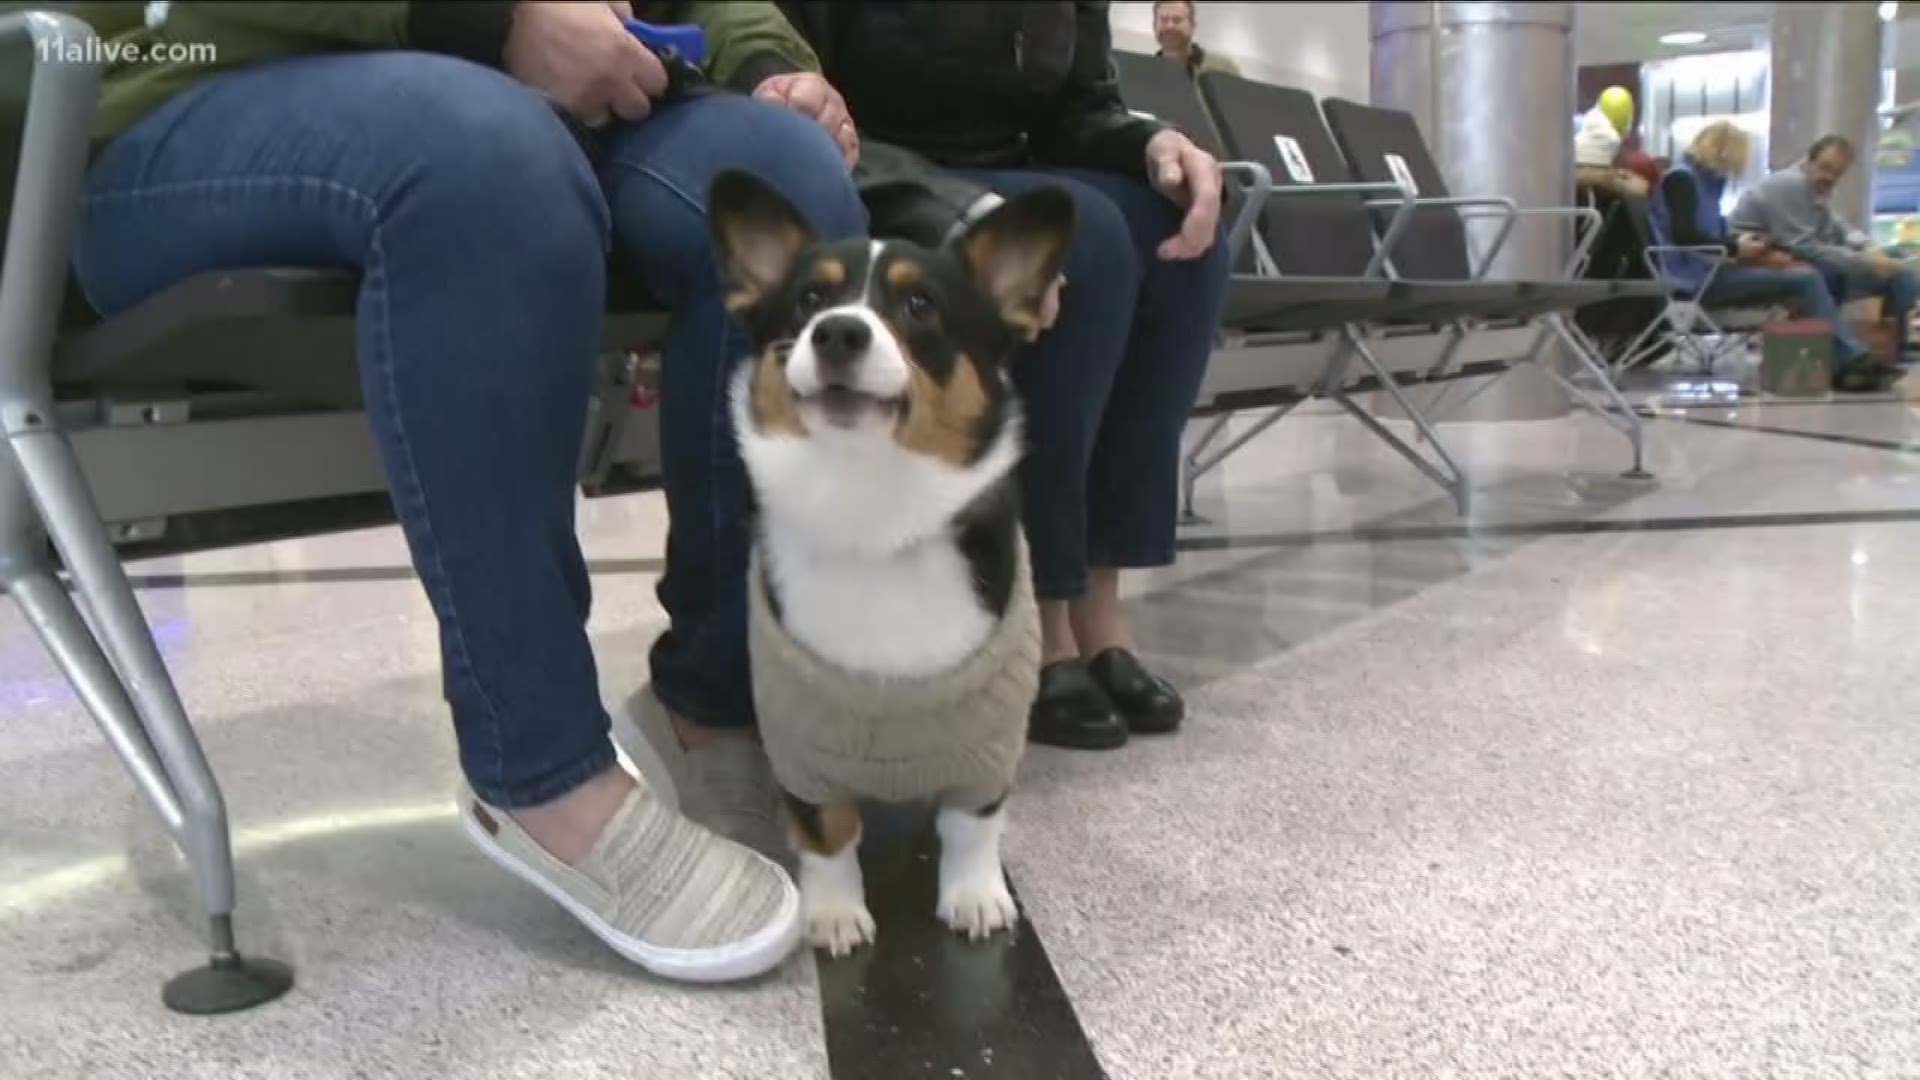 Airline 'support animal' policy is being used by too many groups, some lawmakers believe.